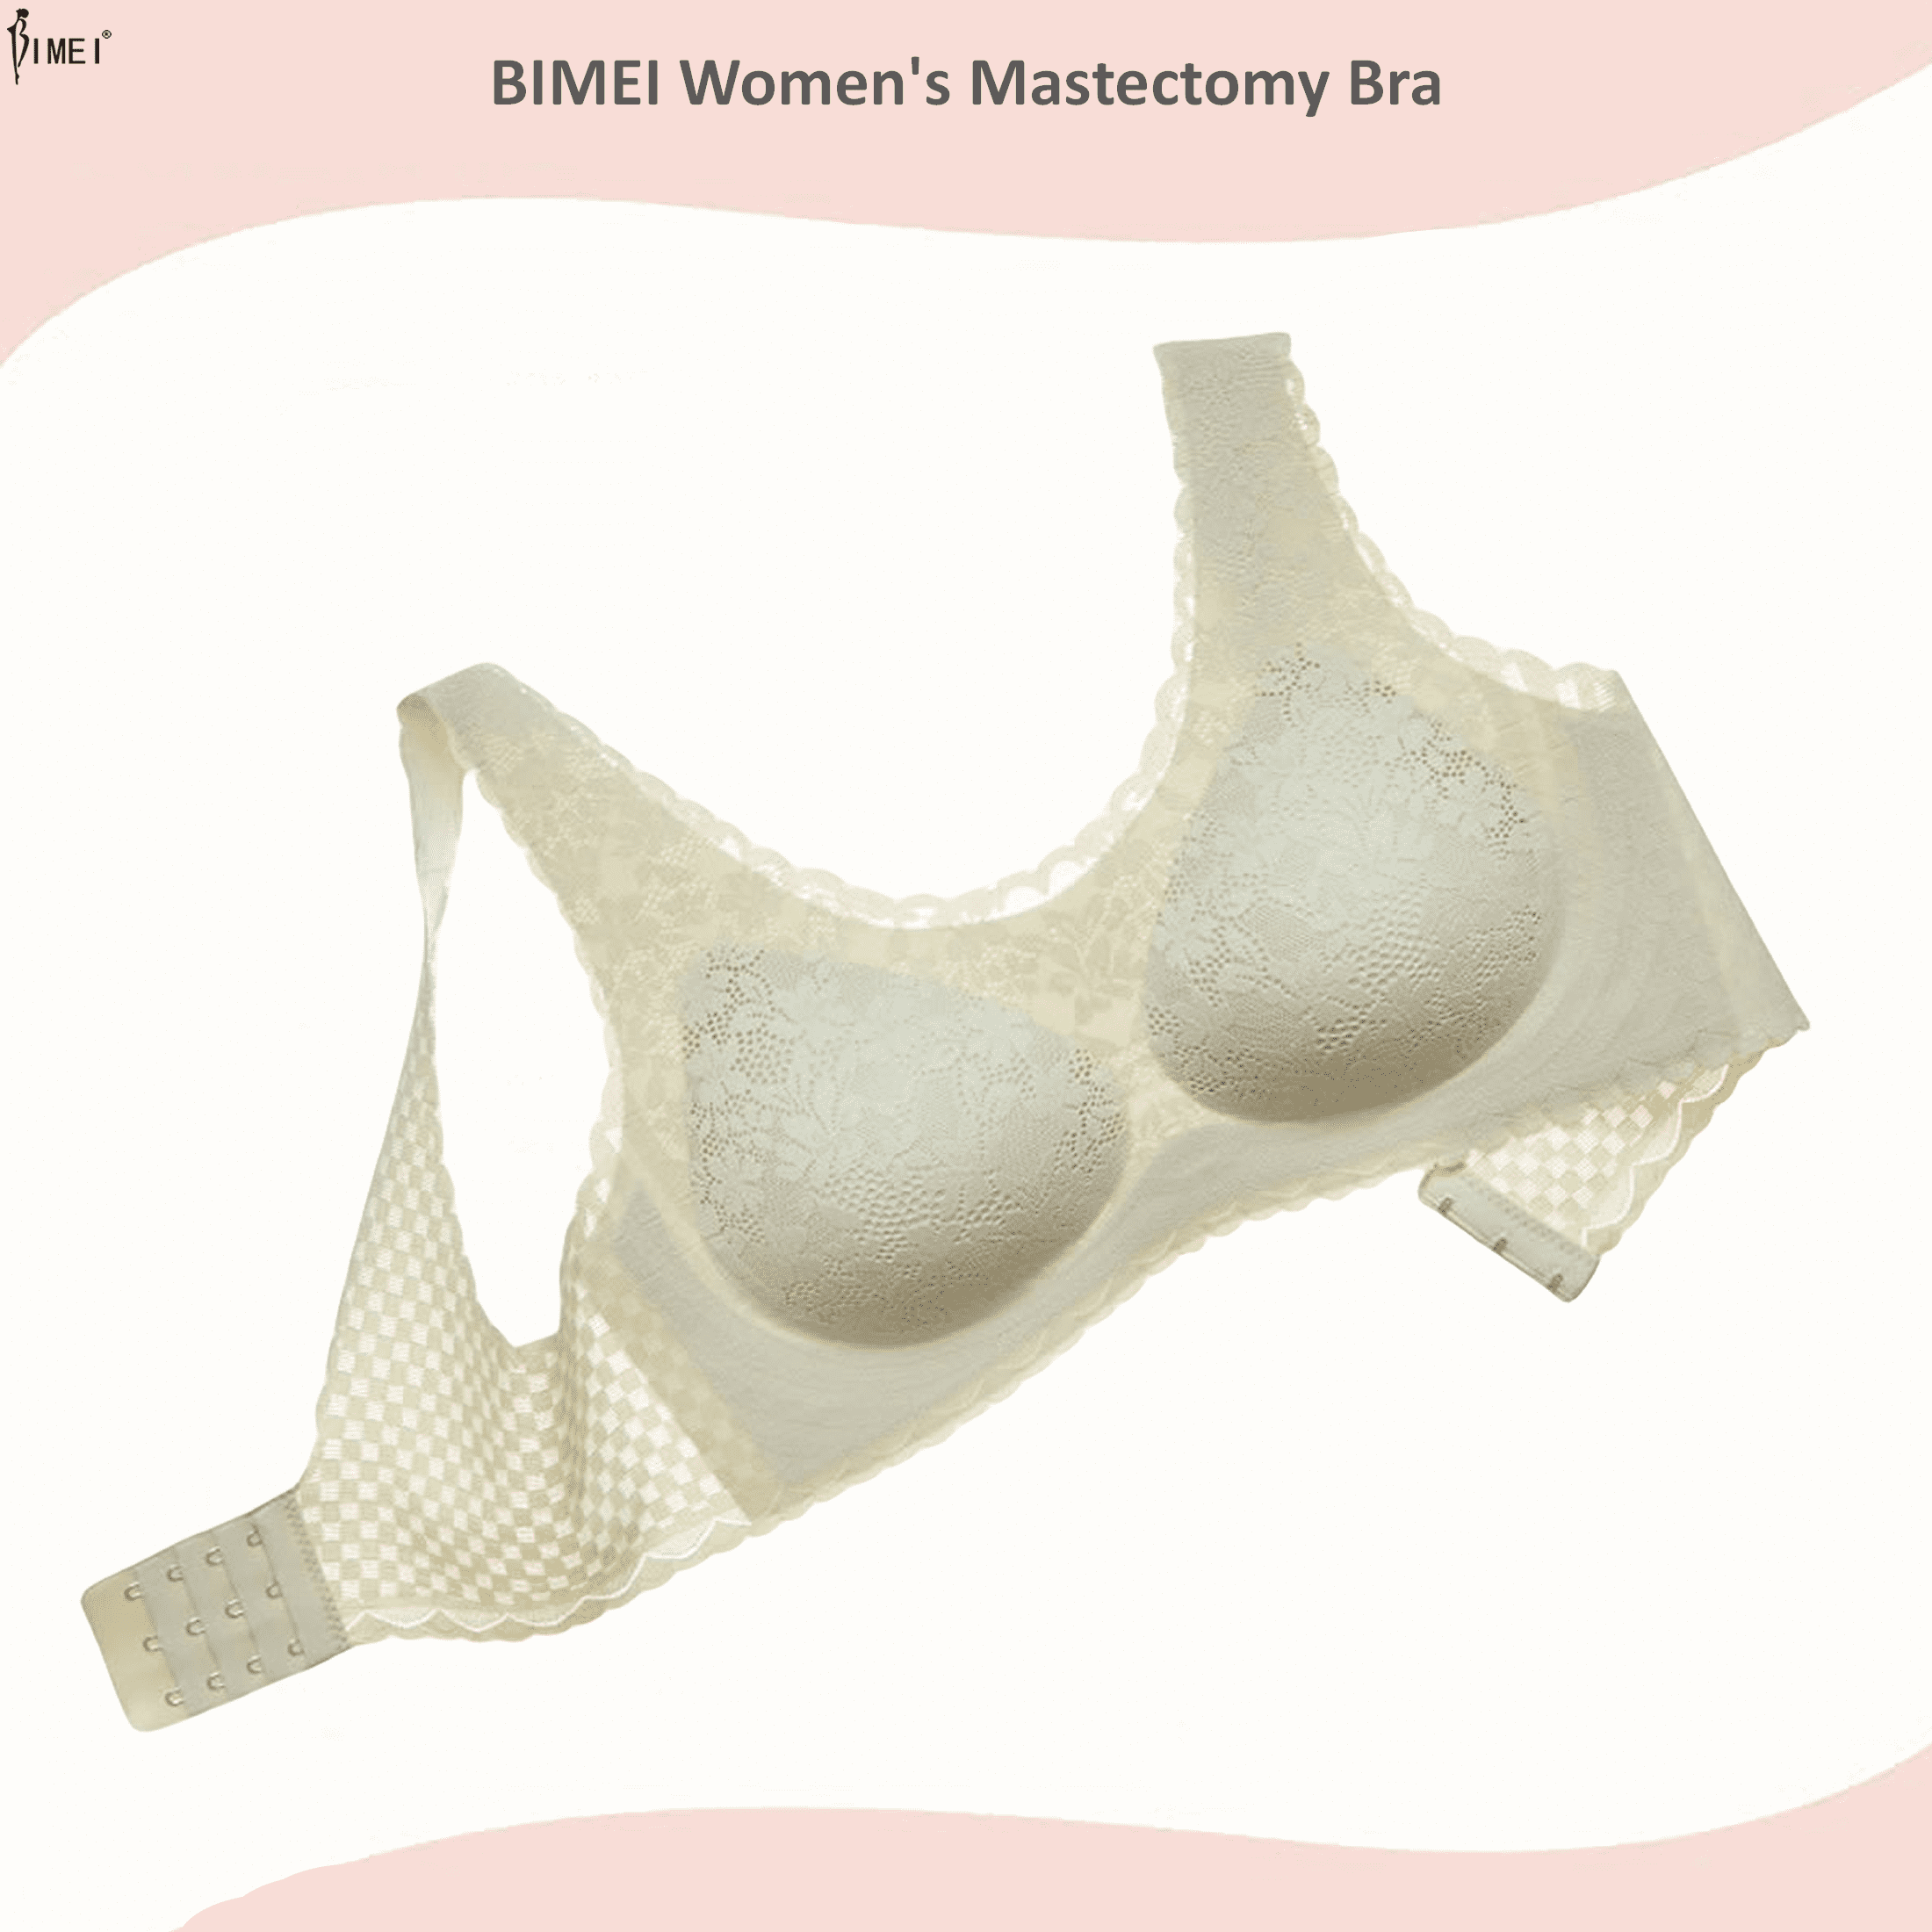 BIMEI Lace Bralettes for Women Mastectomy Bra Breast Prosthesis with Pockets  Wirefree Comfort Everyday Bra,Green,XL 